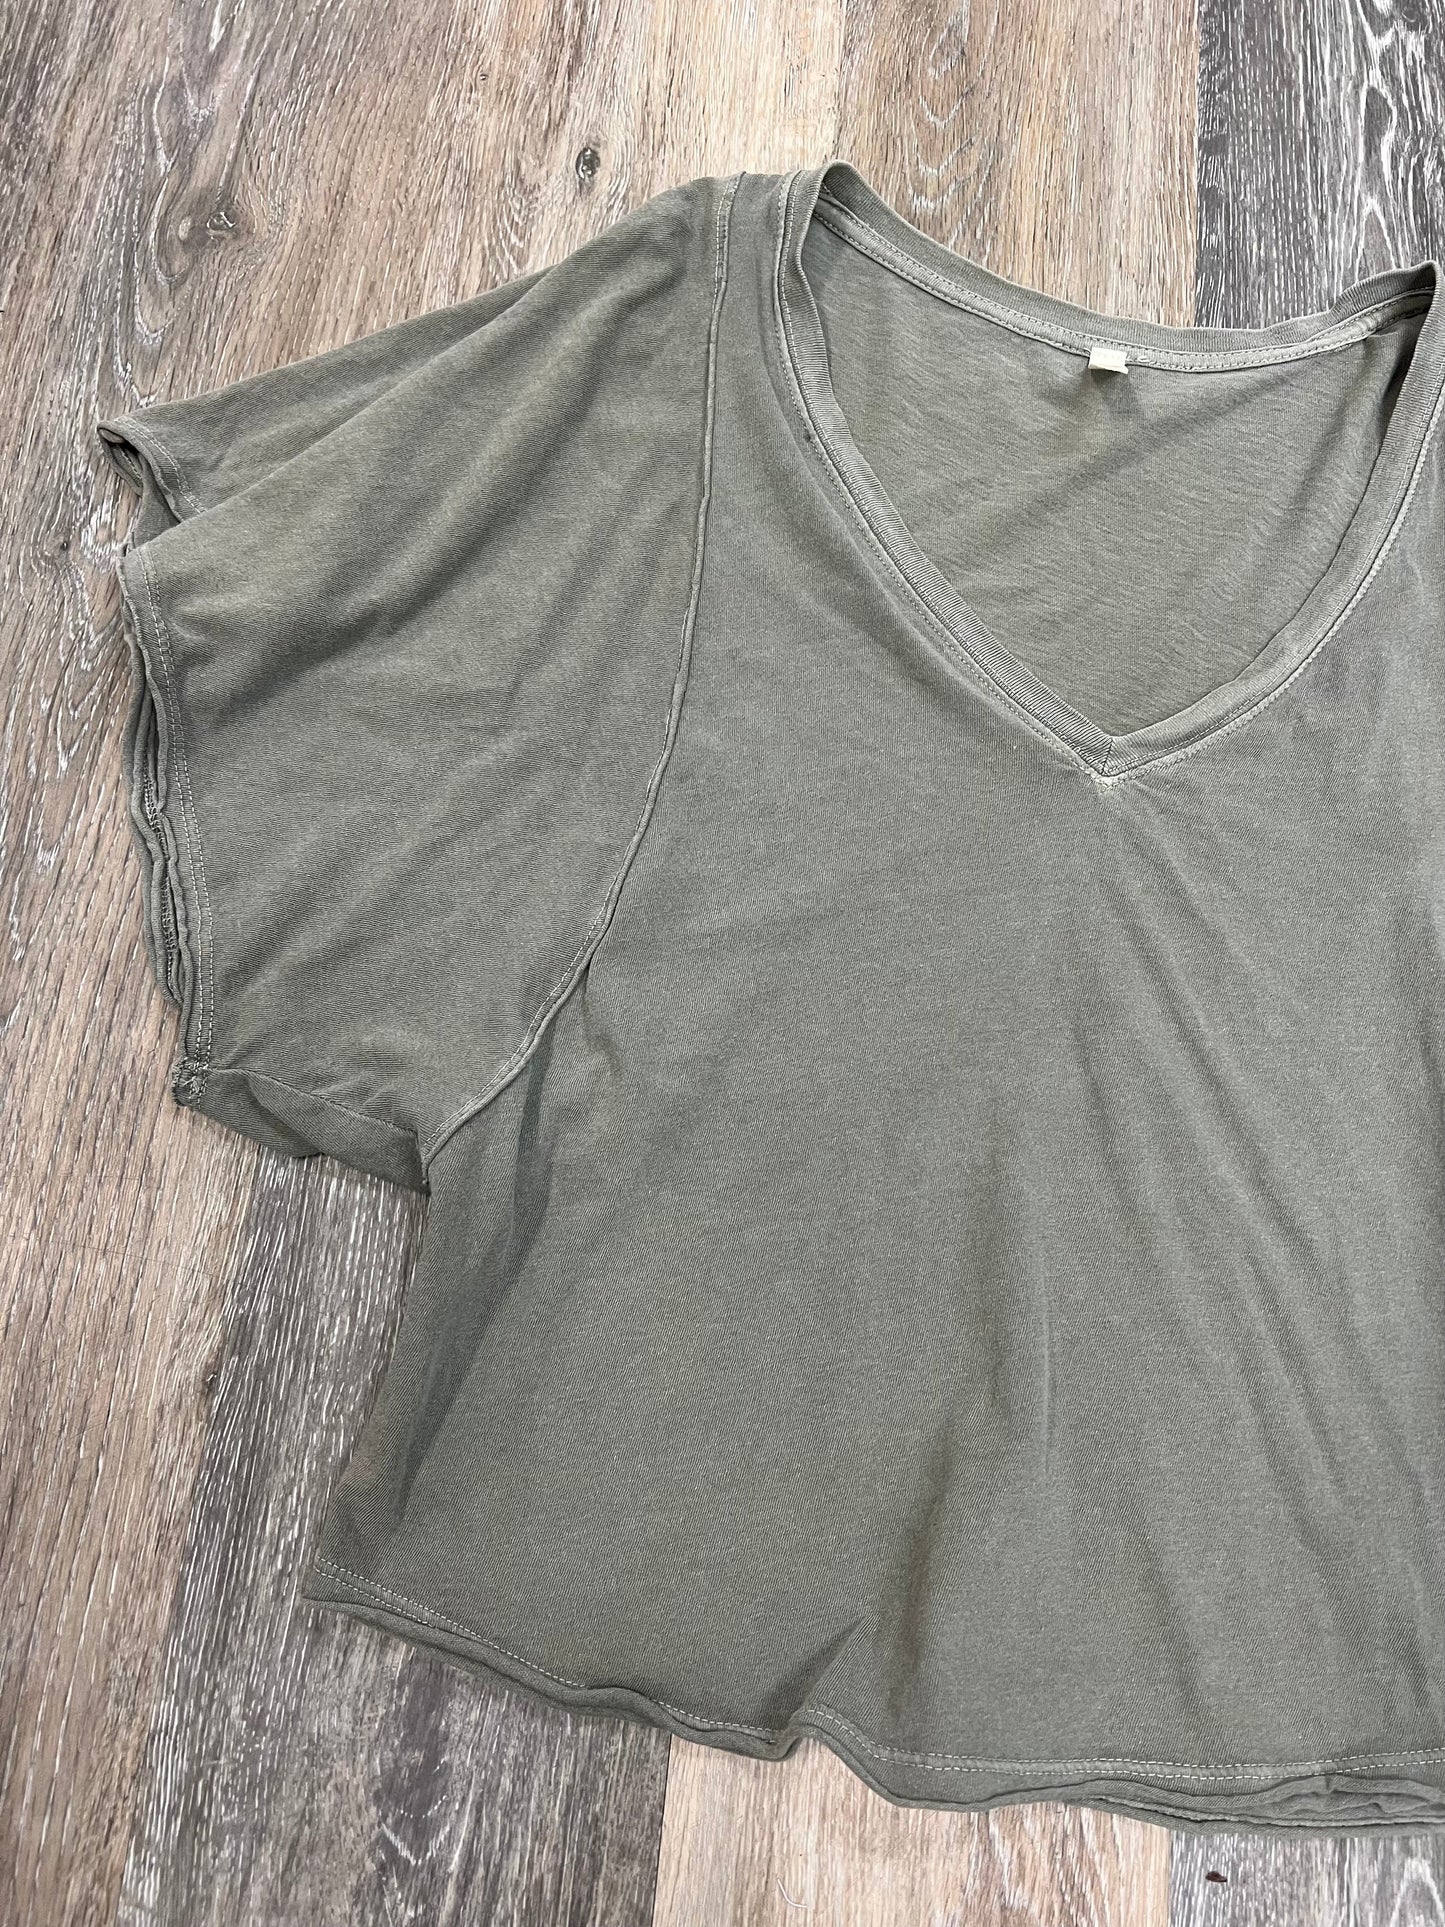 Green Top Short Sleeve Free People, Size Xs